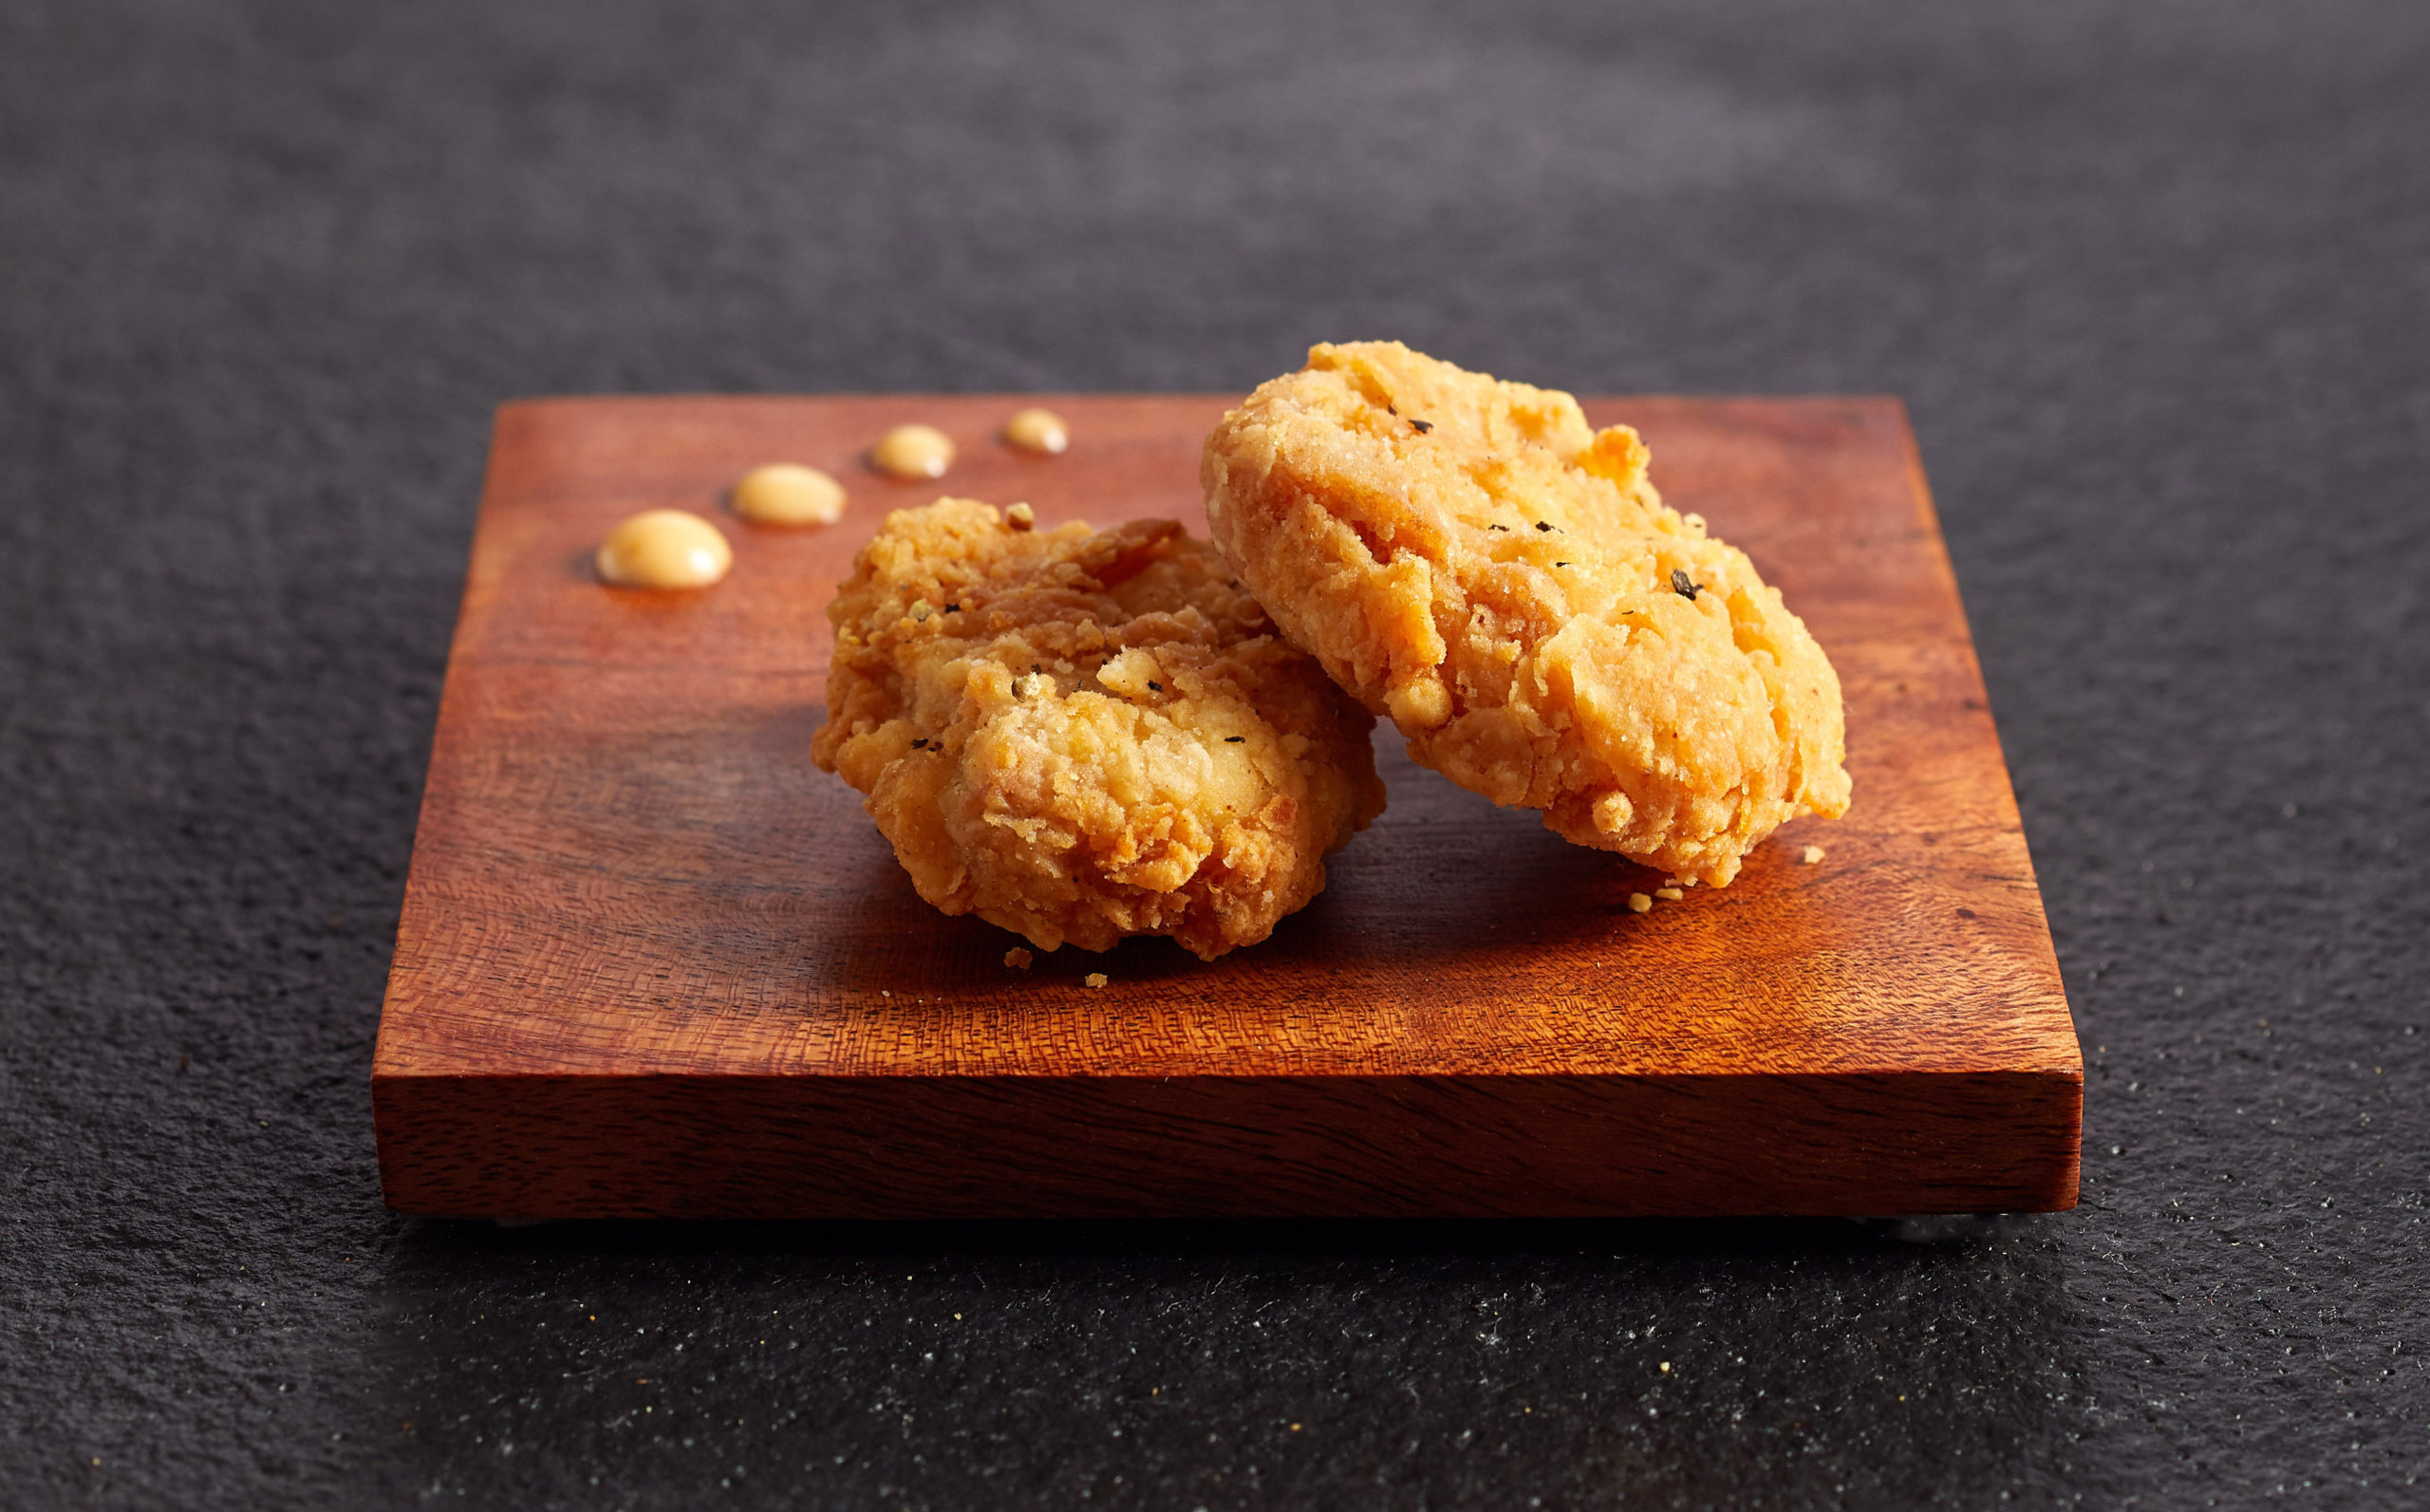 Cultured chicken bites by Eat Just's GOOD Meat brand.